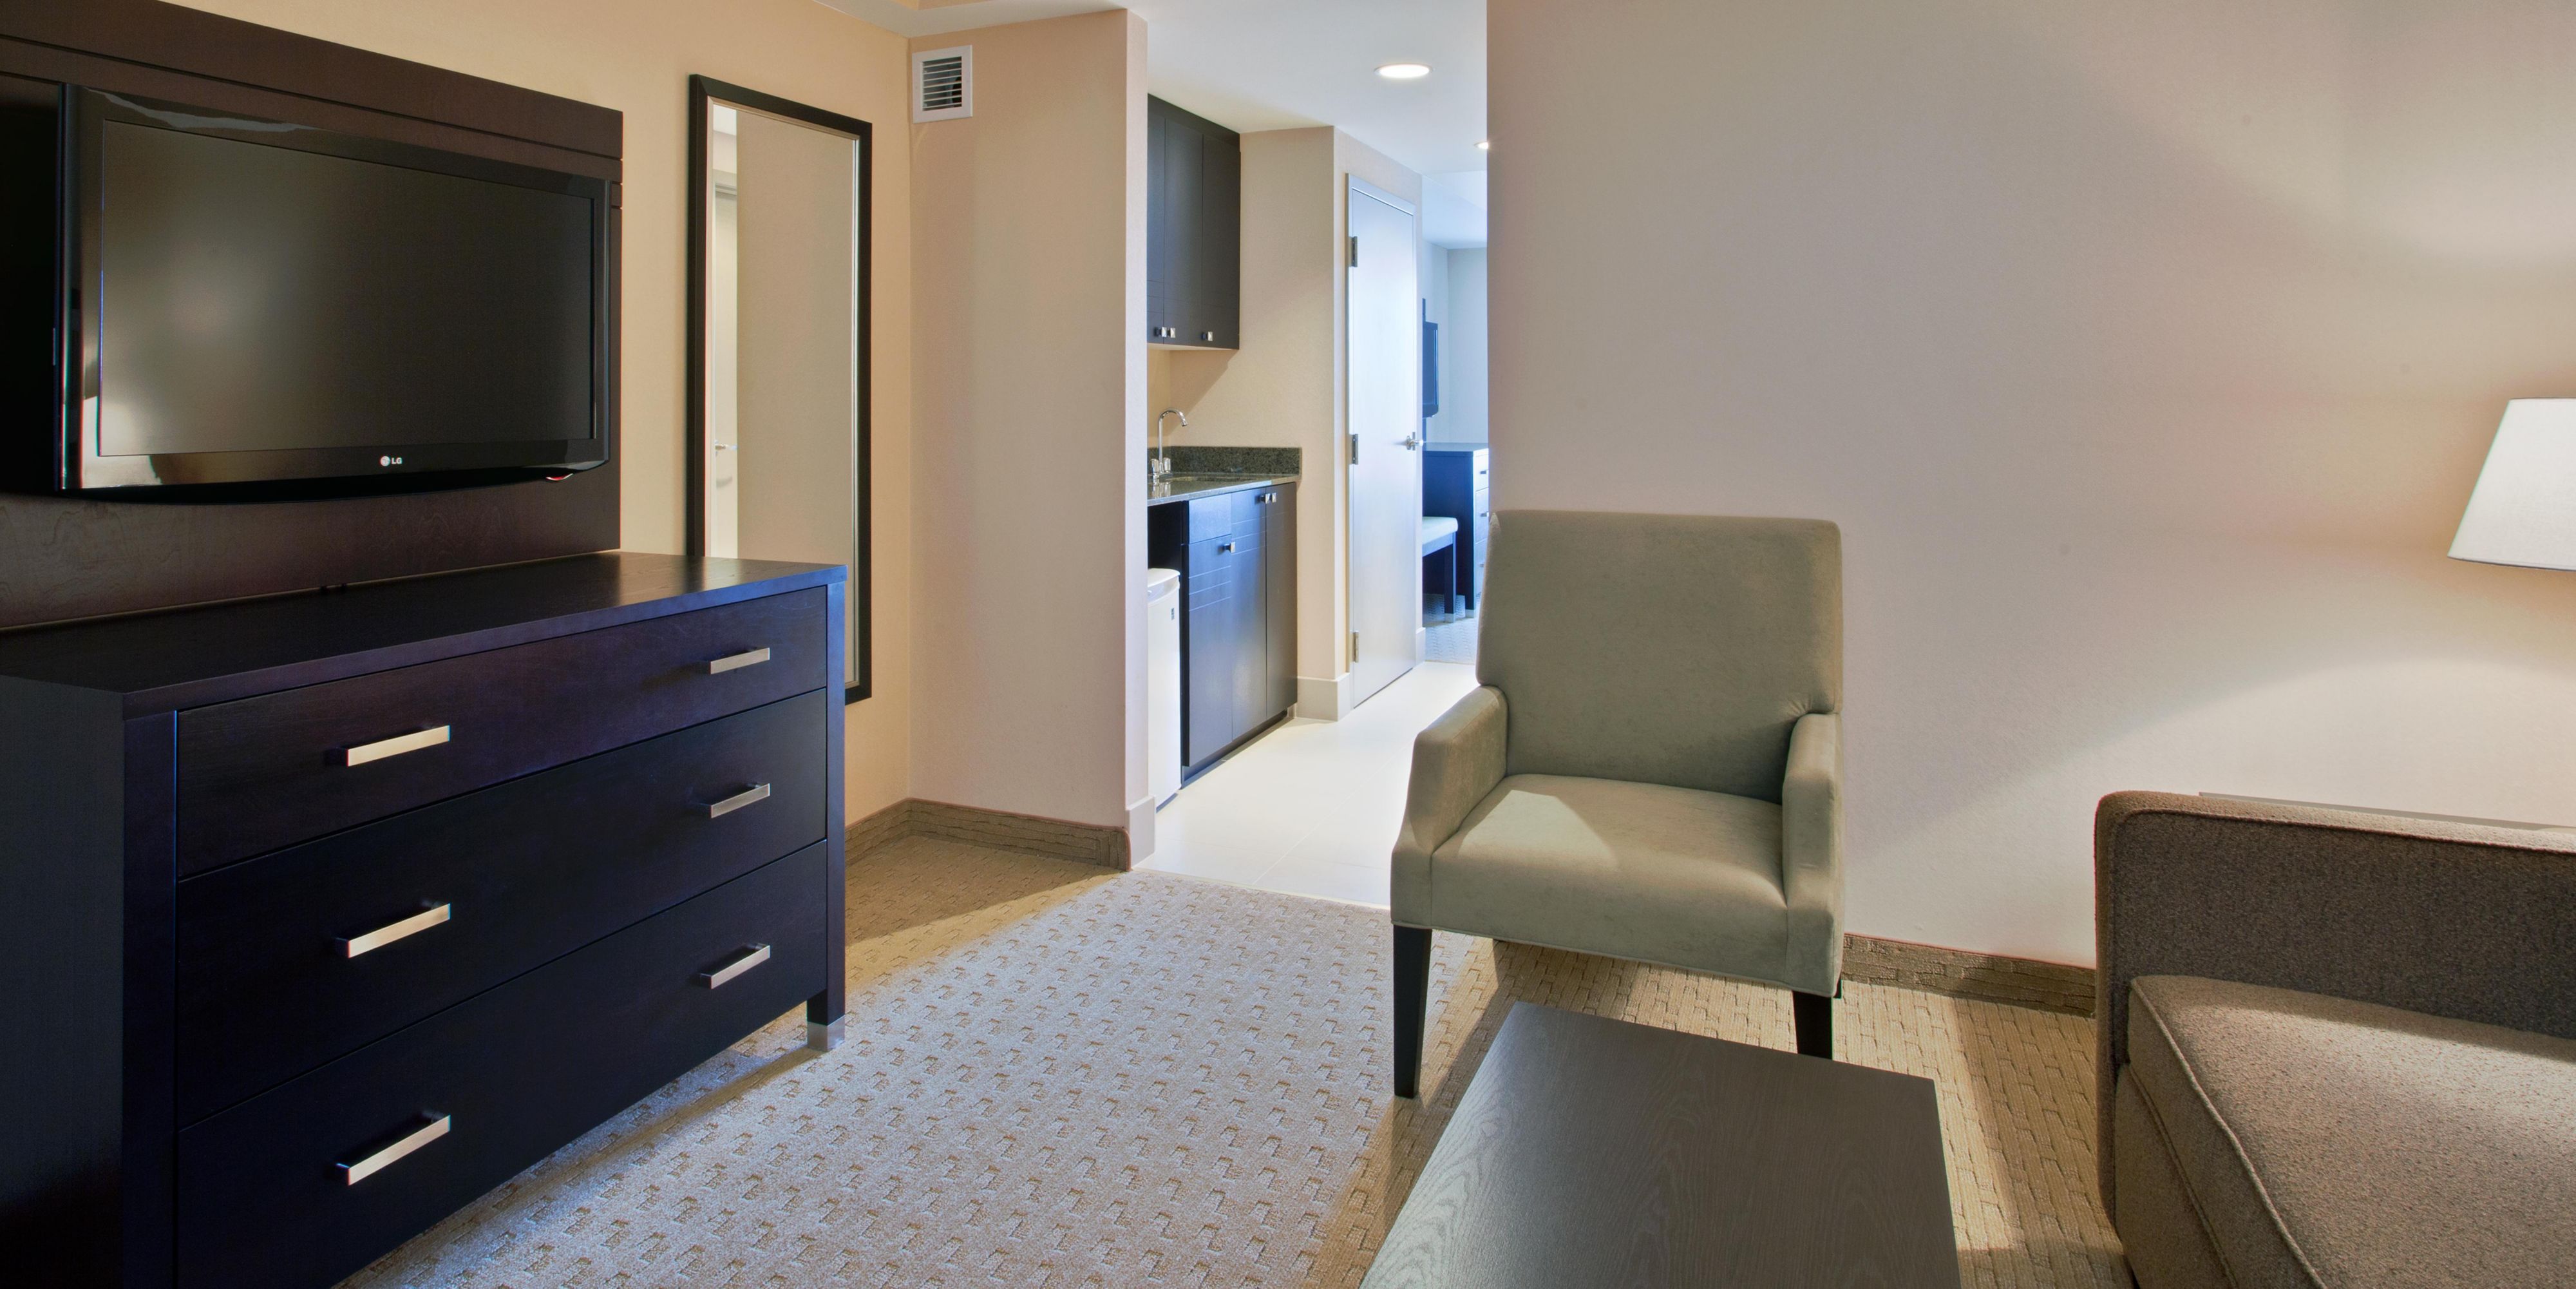 Our suites come with either one king bed or two queen beds, a living area, and a kitchenette. The kitchenette includes a microwave, mini-fridge, and wet bar. A grocery store is located beside the hotel and is open 7 days a week.